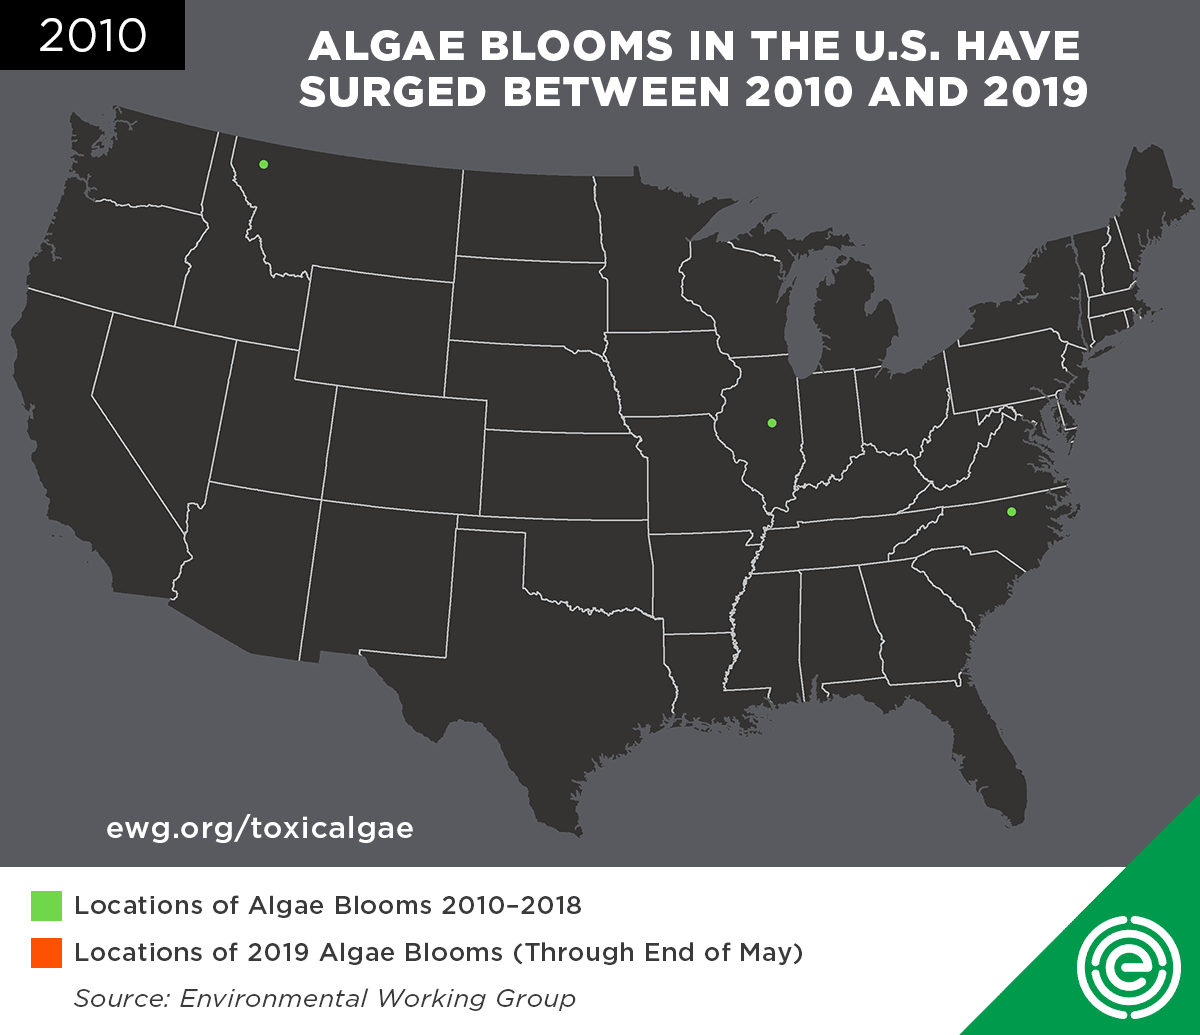 Location of algal blooms from 2010 to May 2019